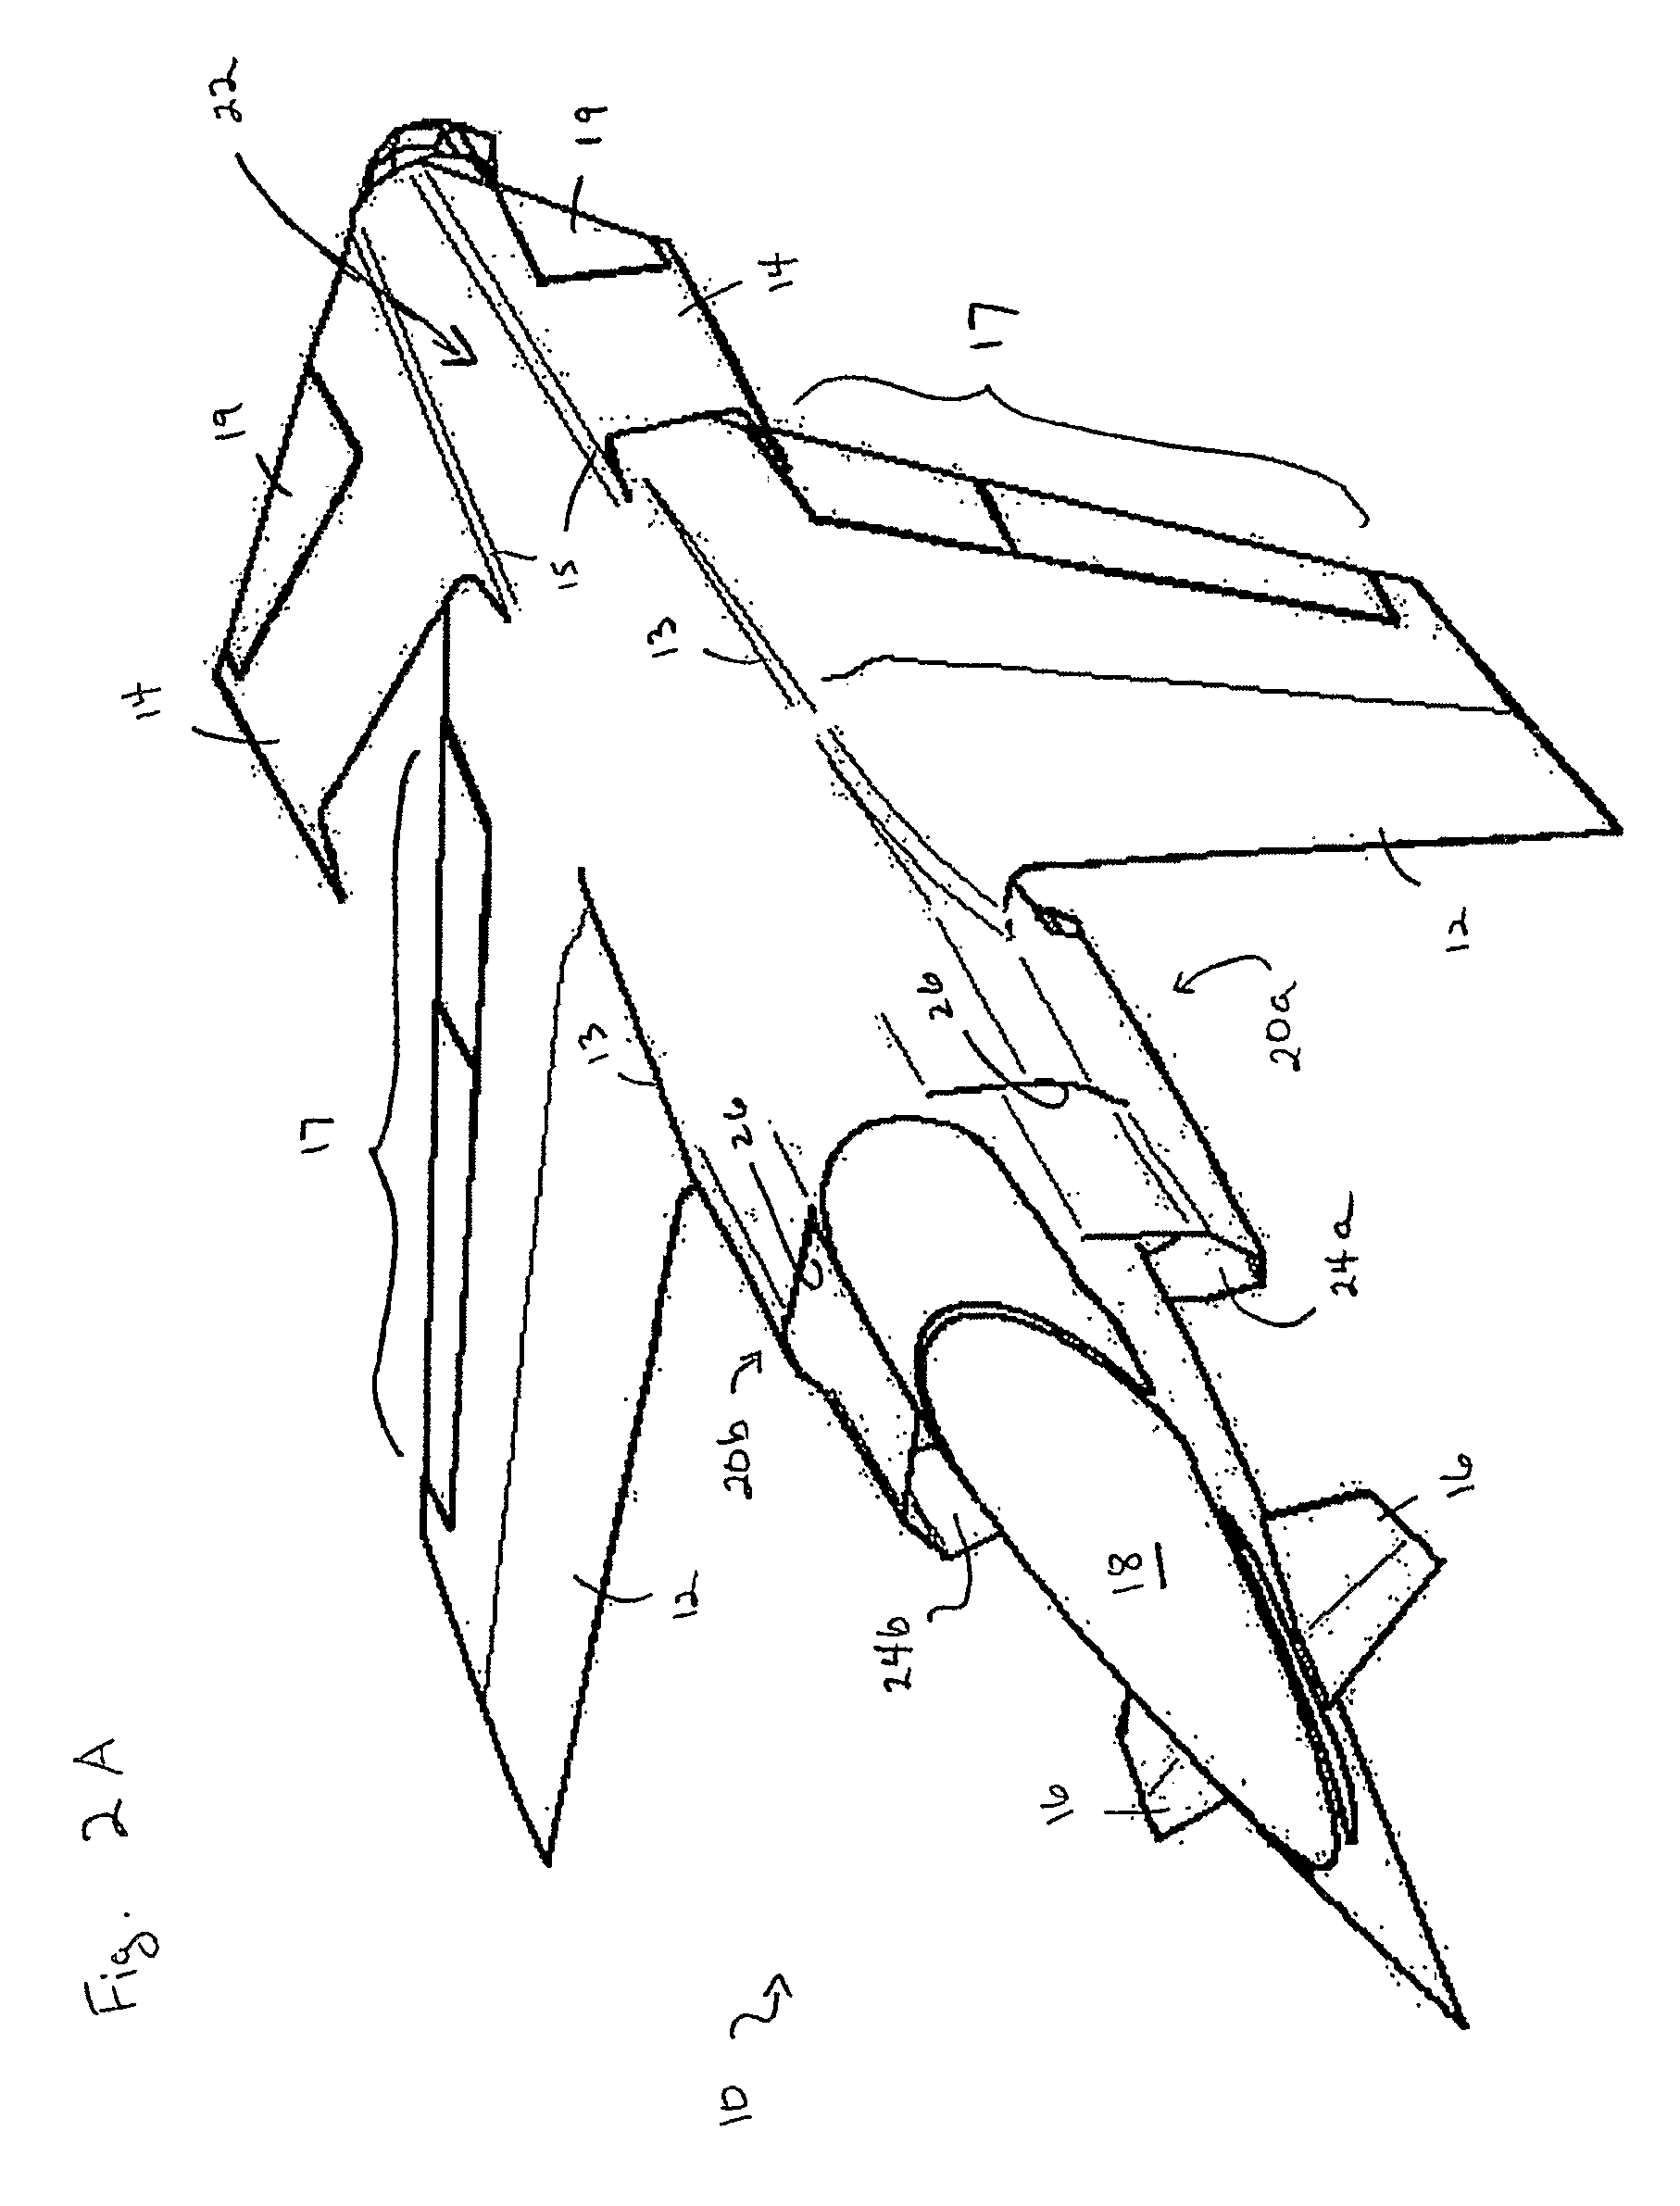 VTOL aircraft with forward-swept fixed wing